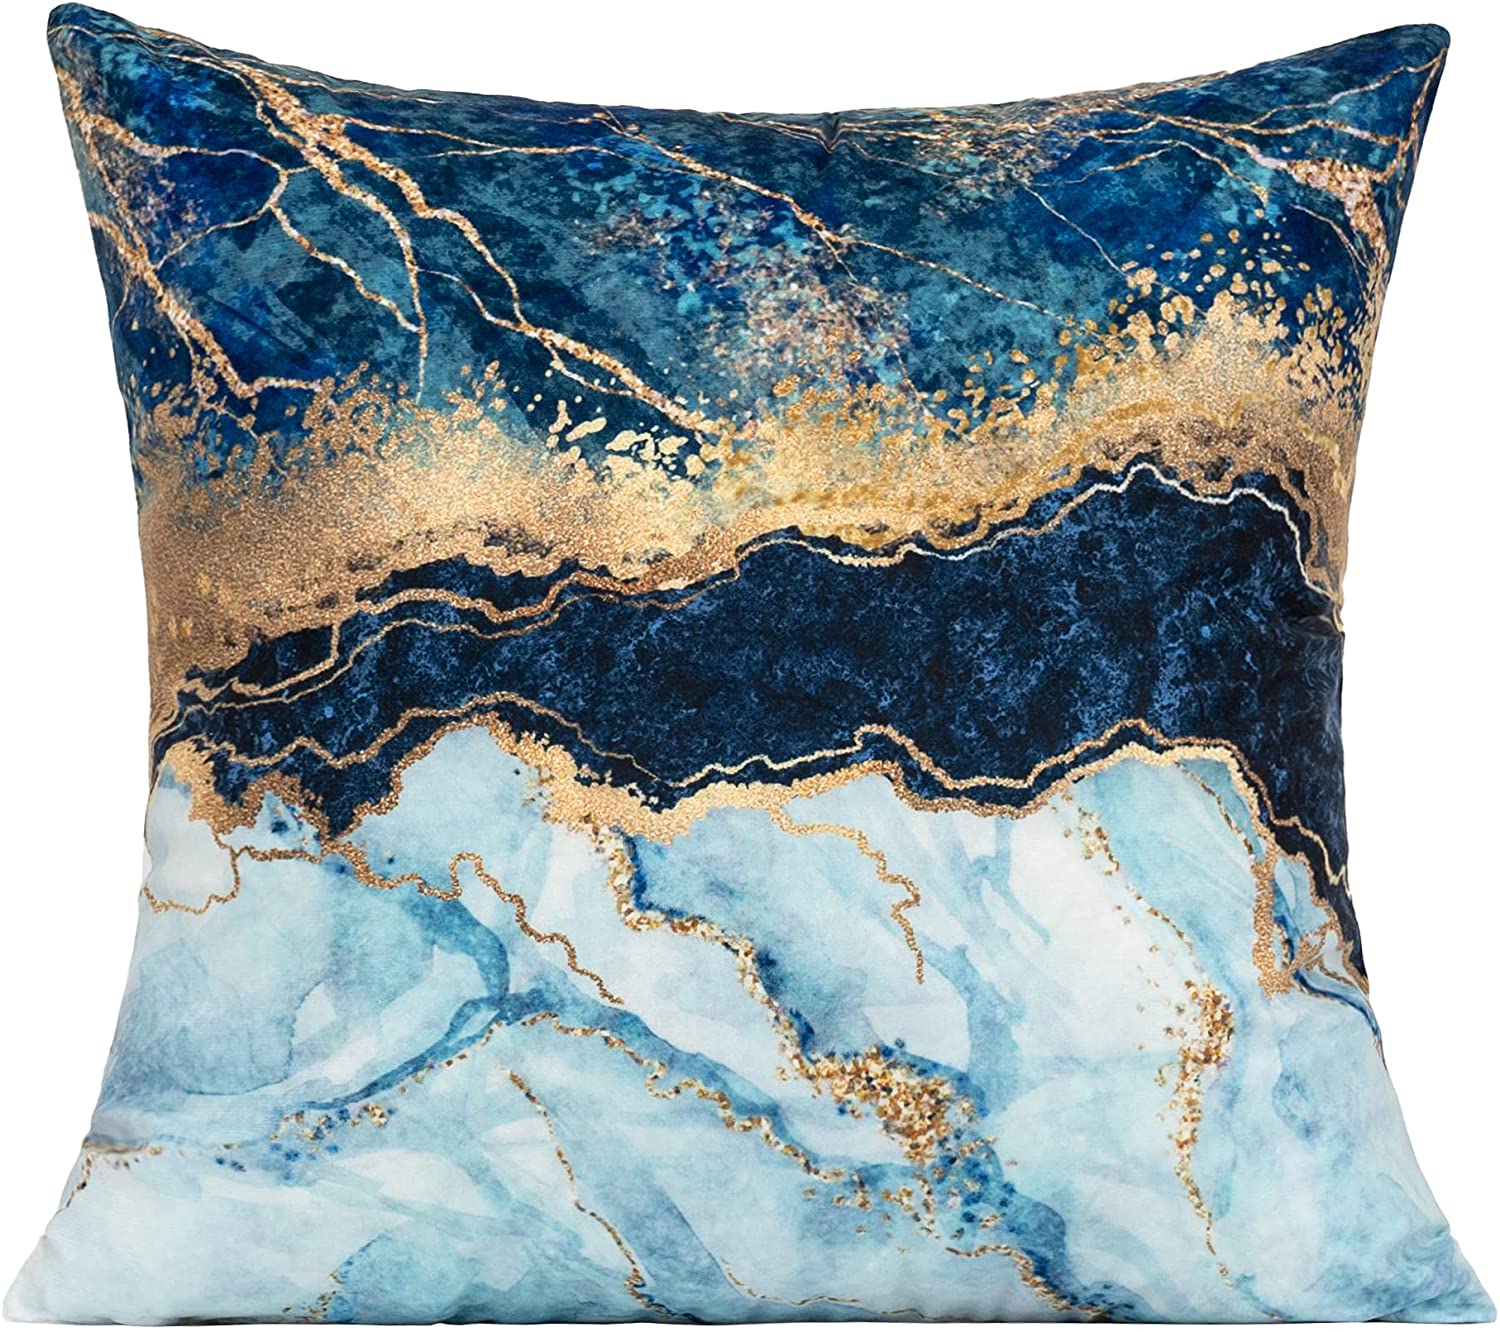 VAKADO Navy Blue Outdoor Throw Pillows Covers Gold Teal Decorative Turquoise Marble Abstract Spring Patio Furniture Bench Couch Cushion Covers 18X18 Set of 4 for Summer Sofa Chair